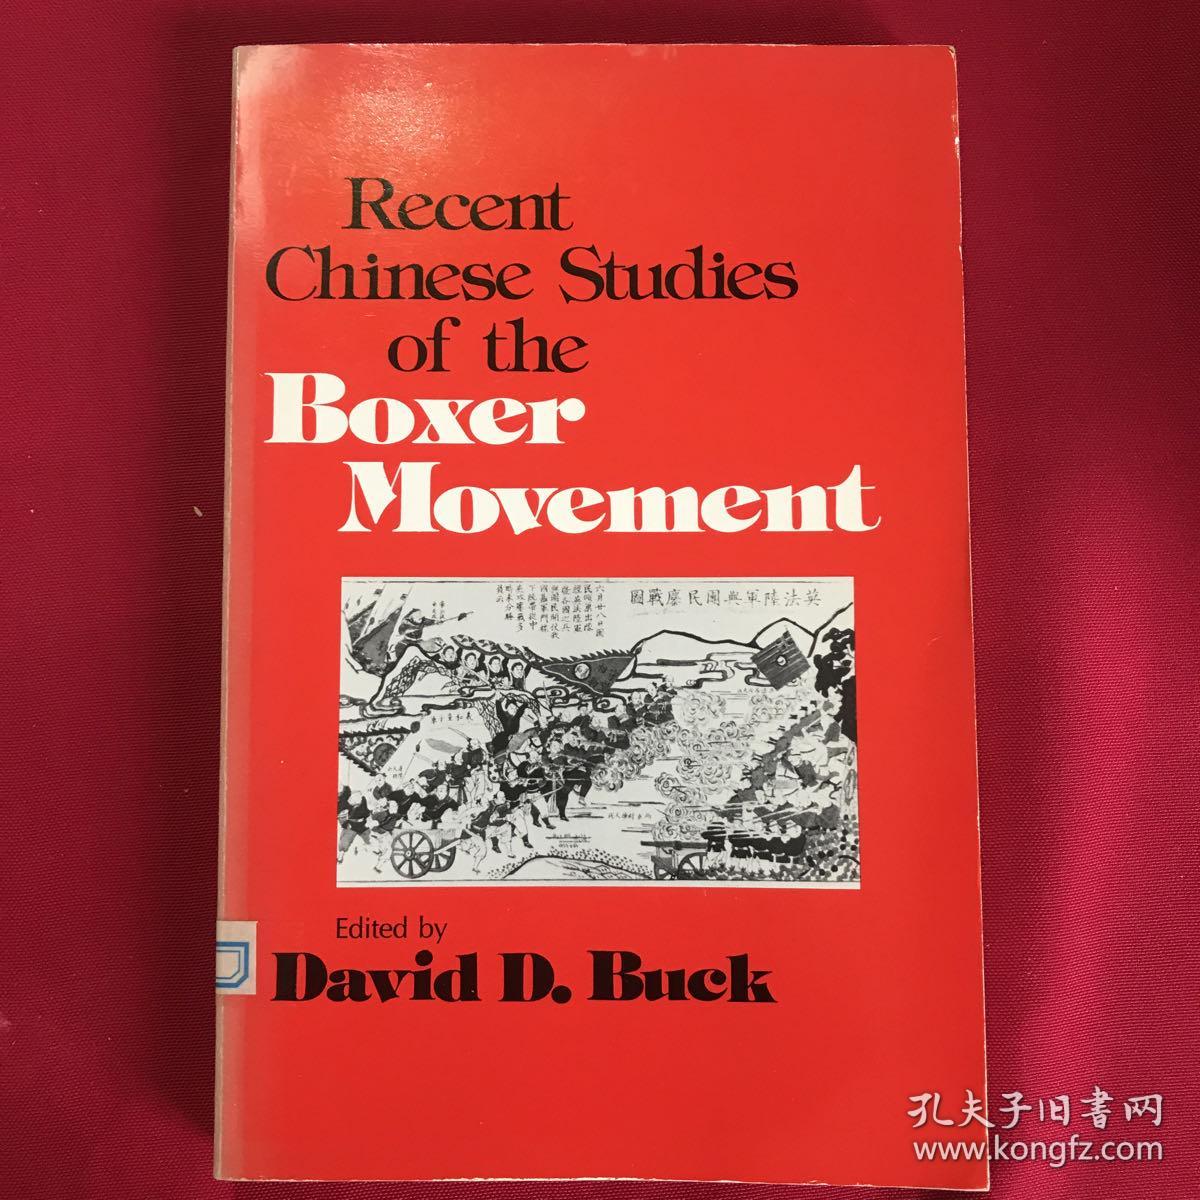 Recent Chinese Studies of the Boxer Movement